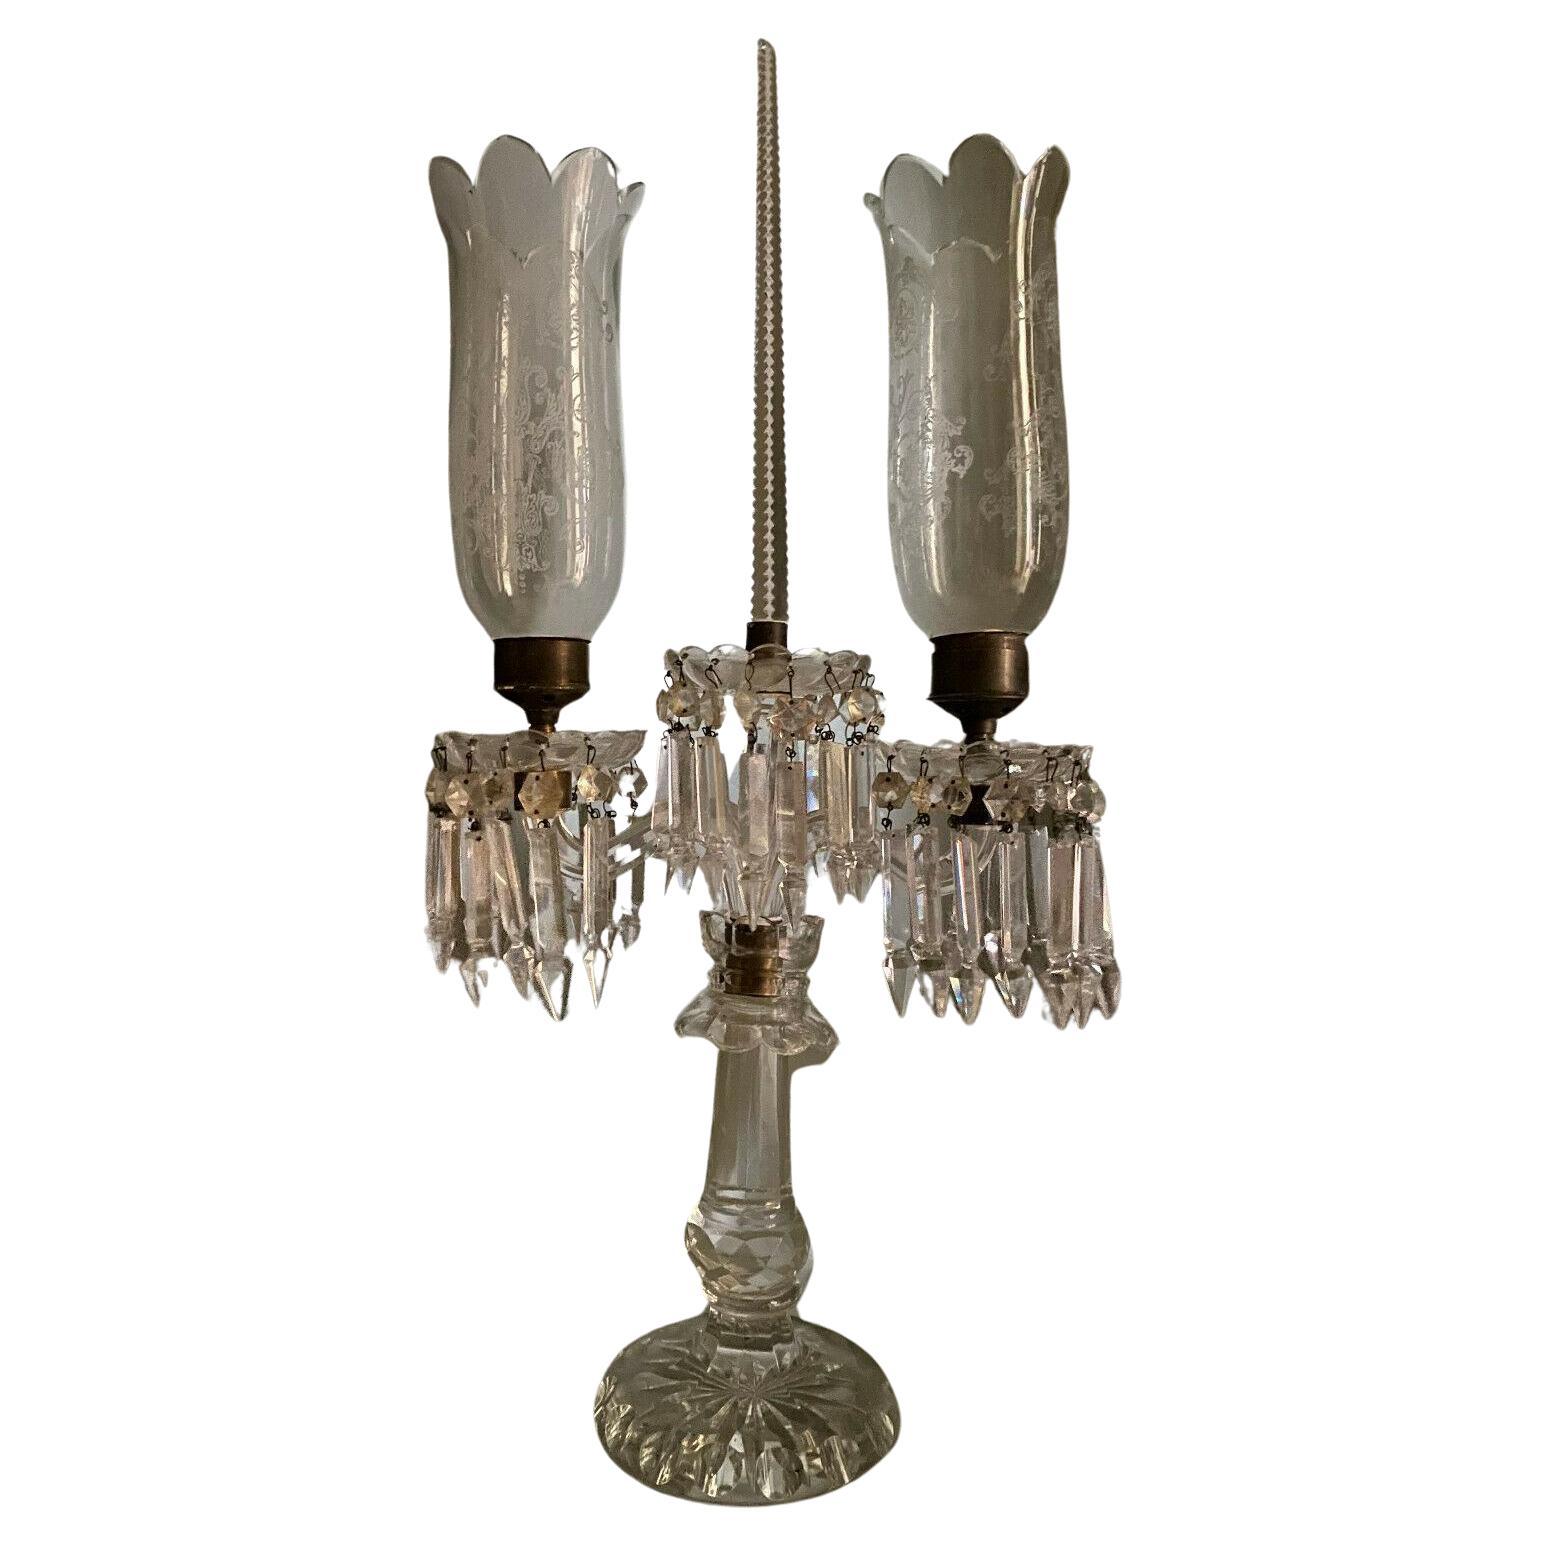 19thc French Napoleon III Cut Crystal Candelabra attributed to Baccarat 